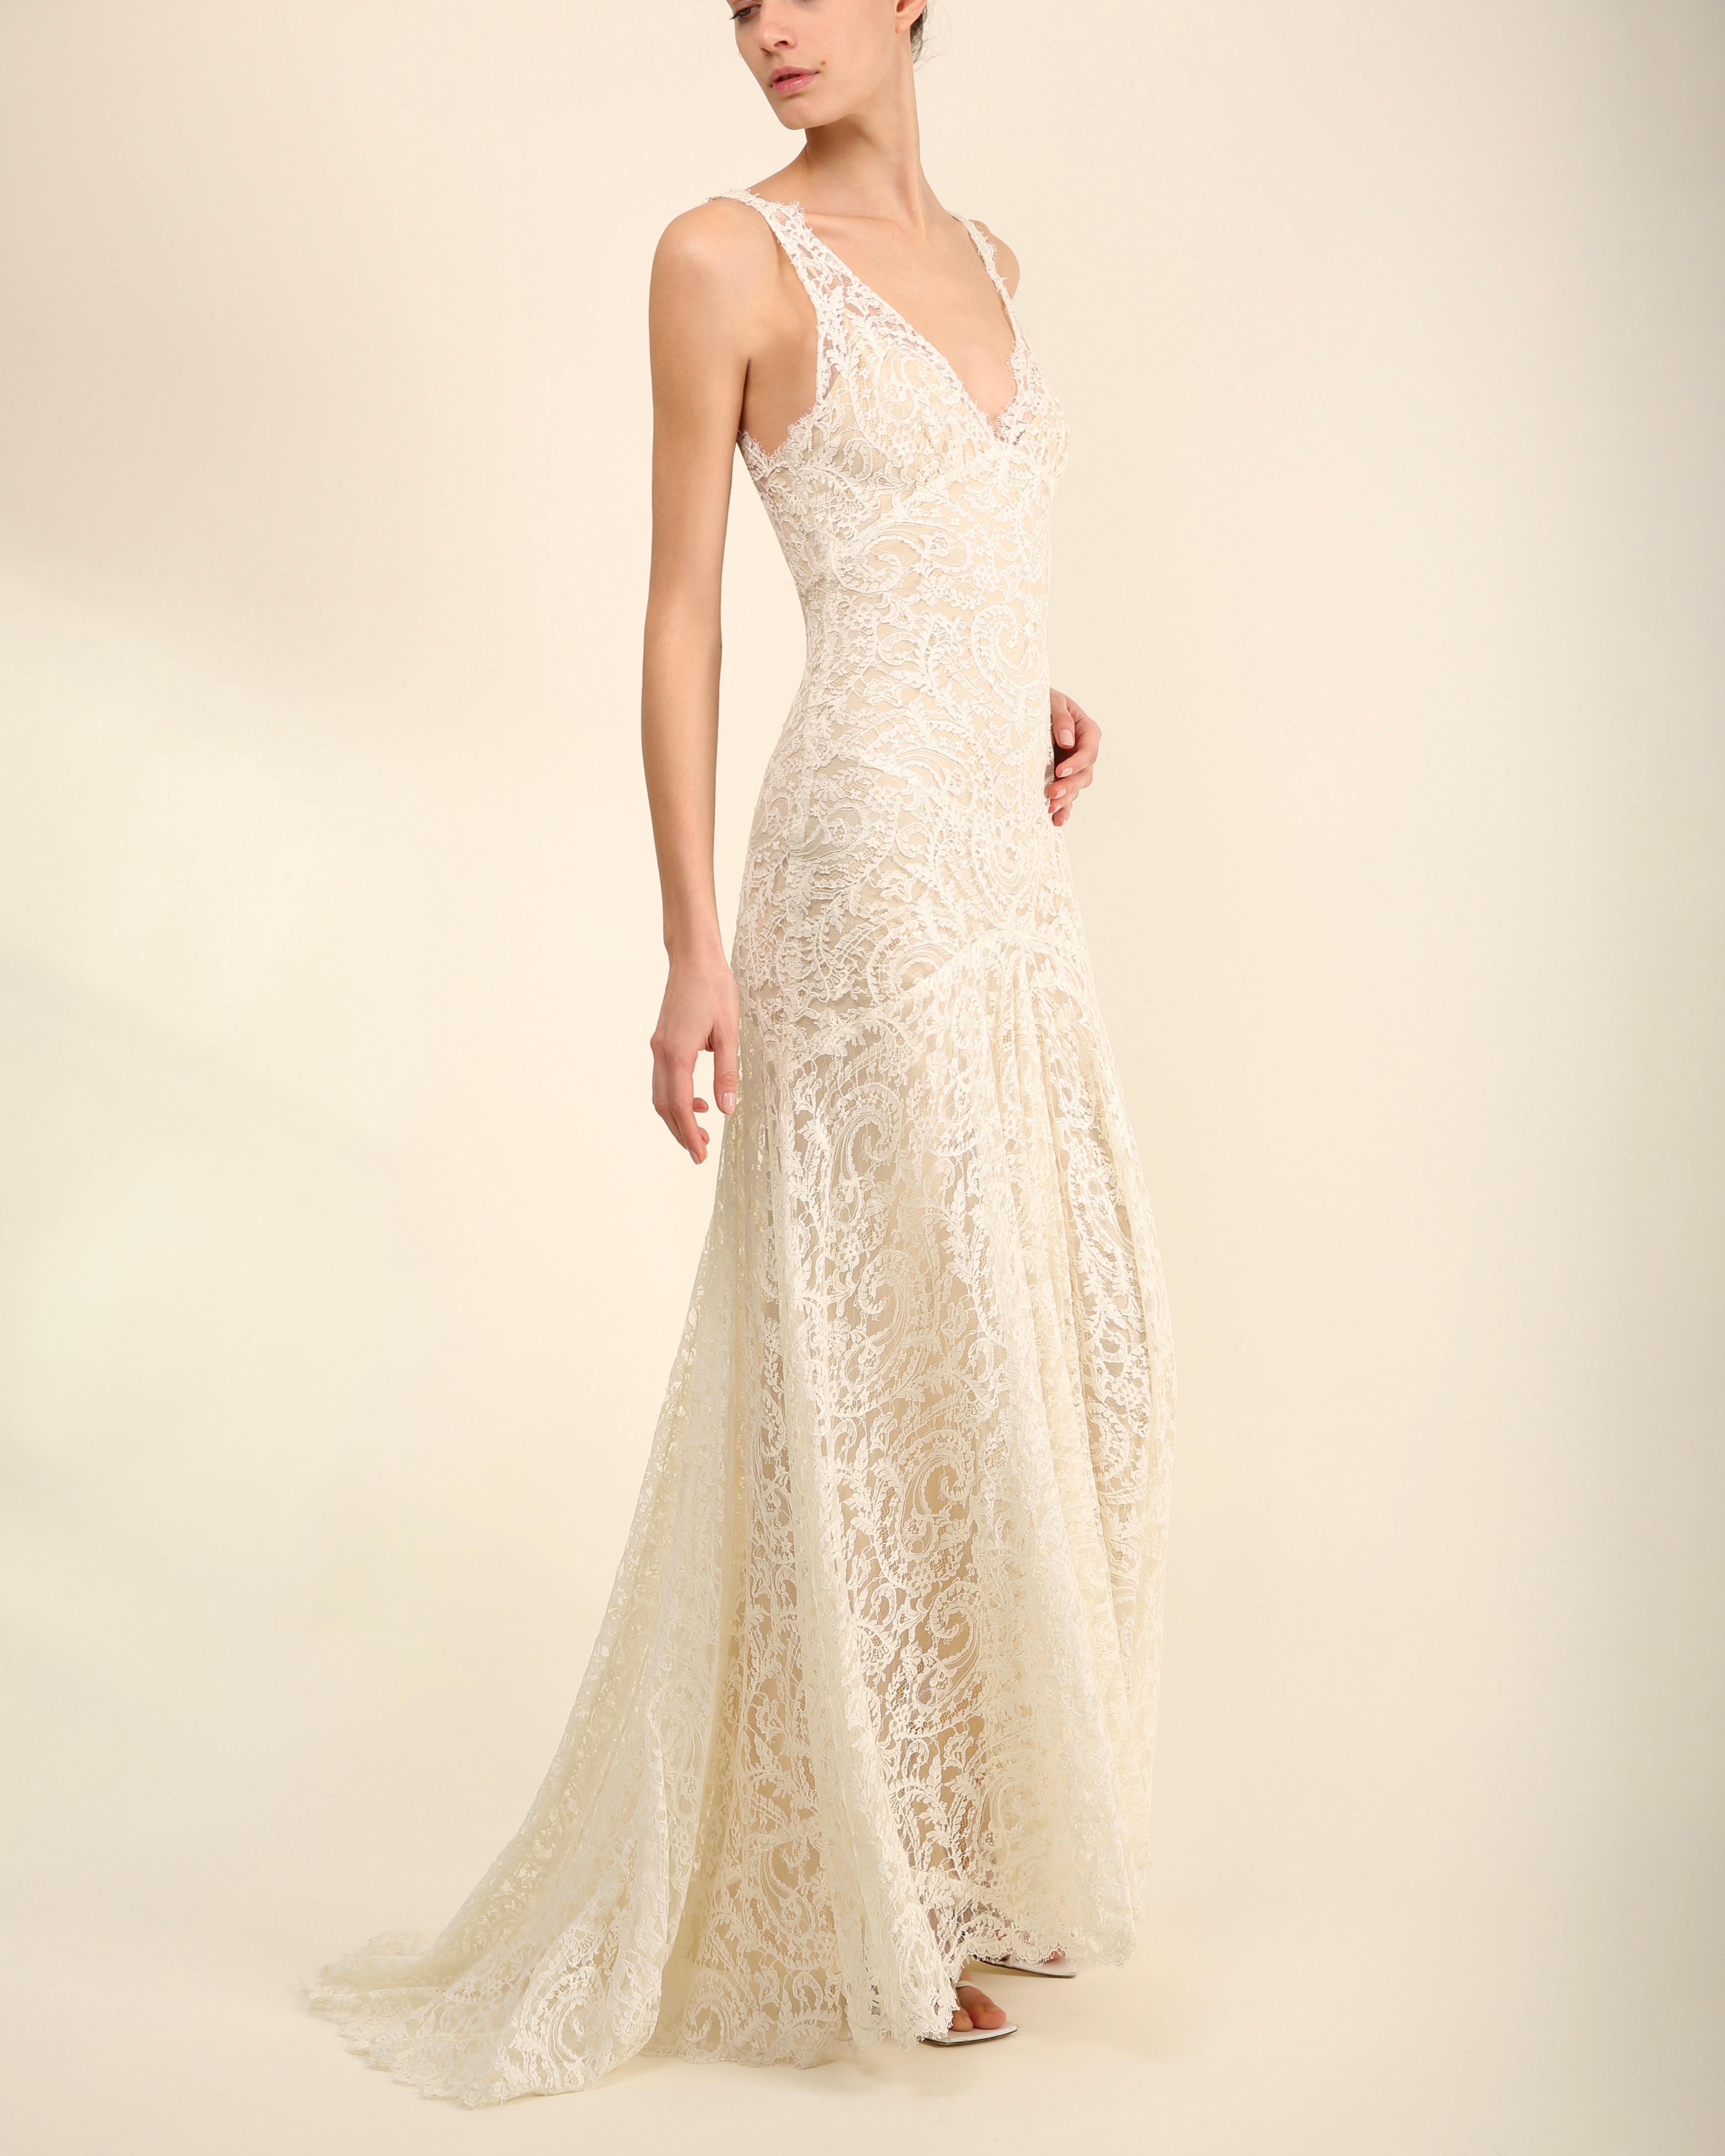 LOVE LALI VINTAGE

A beautiful ivory lace wedding gown by Monique Lhuillier 
The dress is so incredibly romantic and really fits the body like a dream
It consists of two layers, a champagne coloured silk lining that has a sheer ivory lace